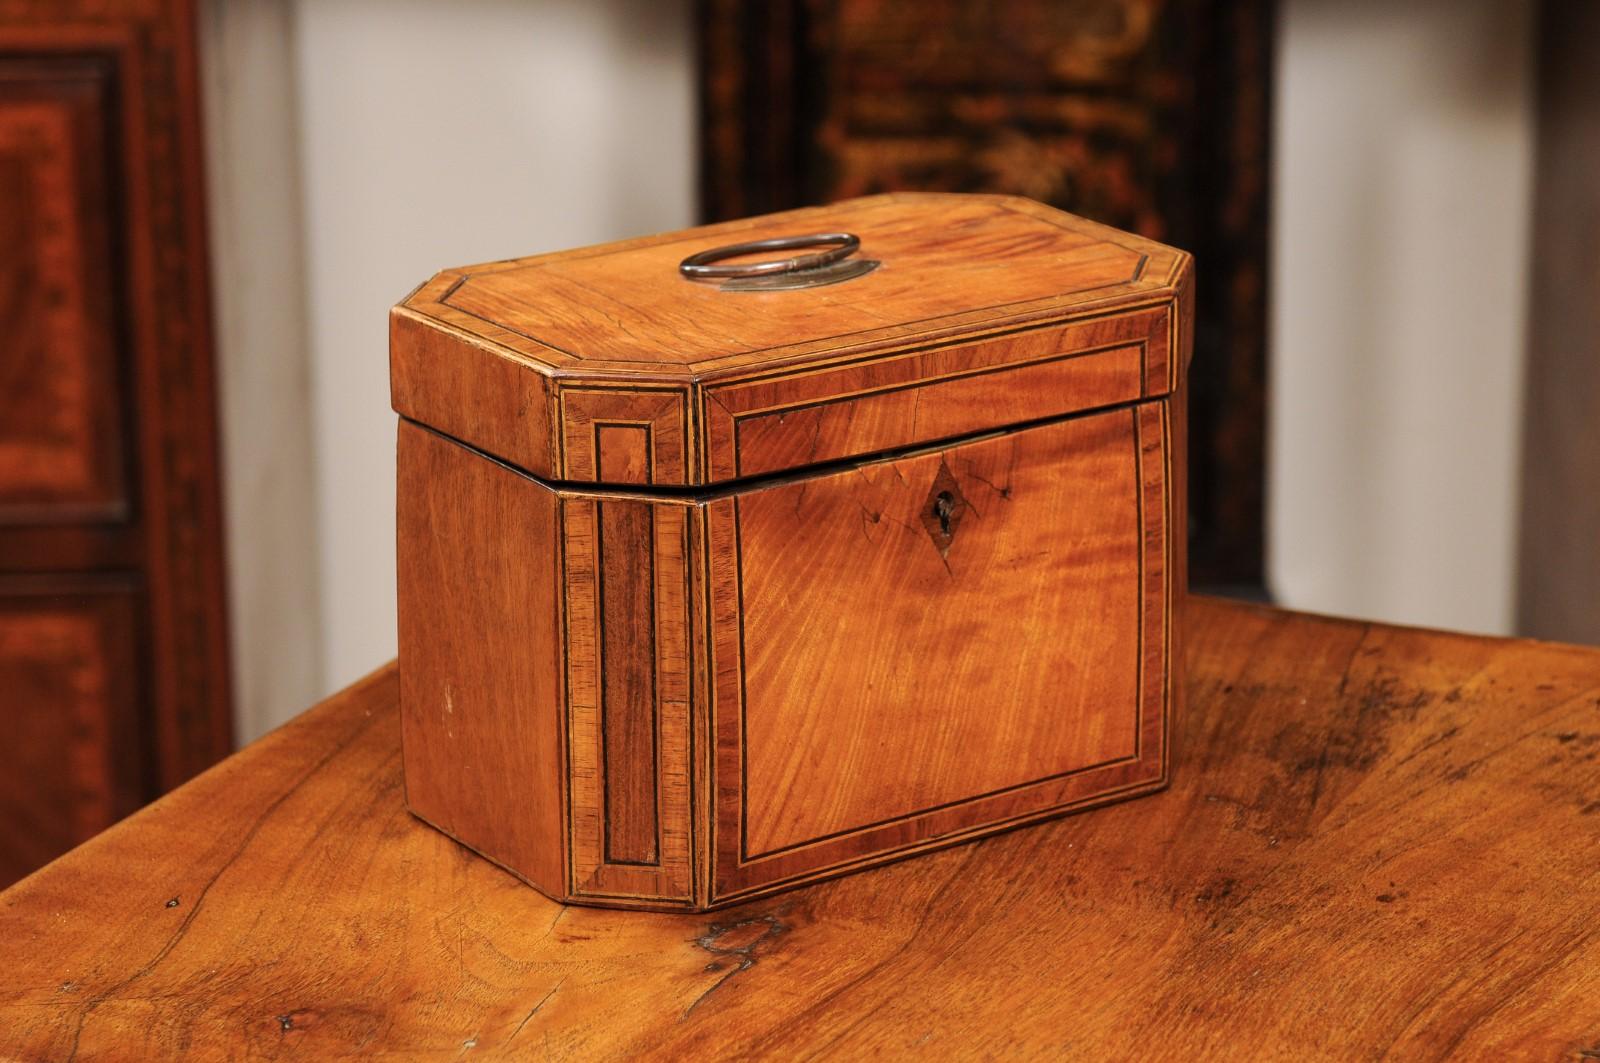  English Octagonal Satinwood Tea Caddy with Rosewood Cross Banding  In Good Condition For Sale In Atlanta, GA